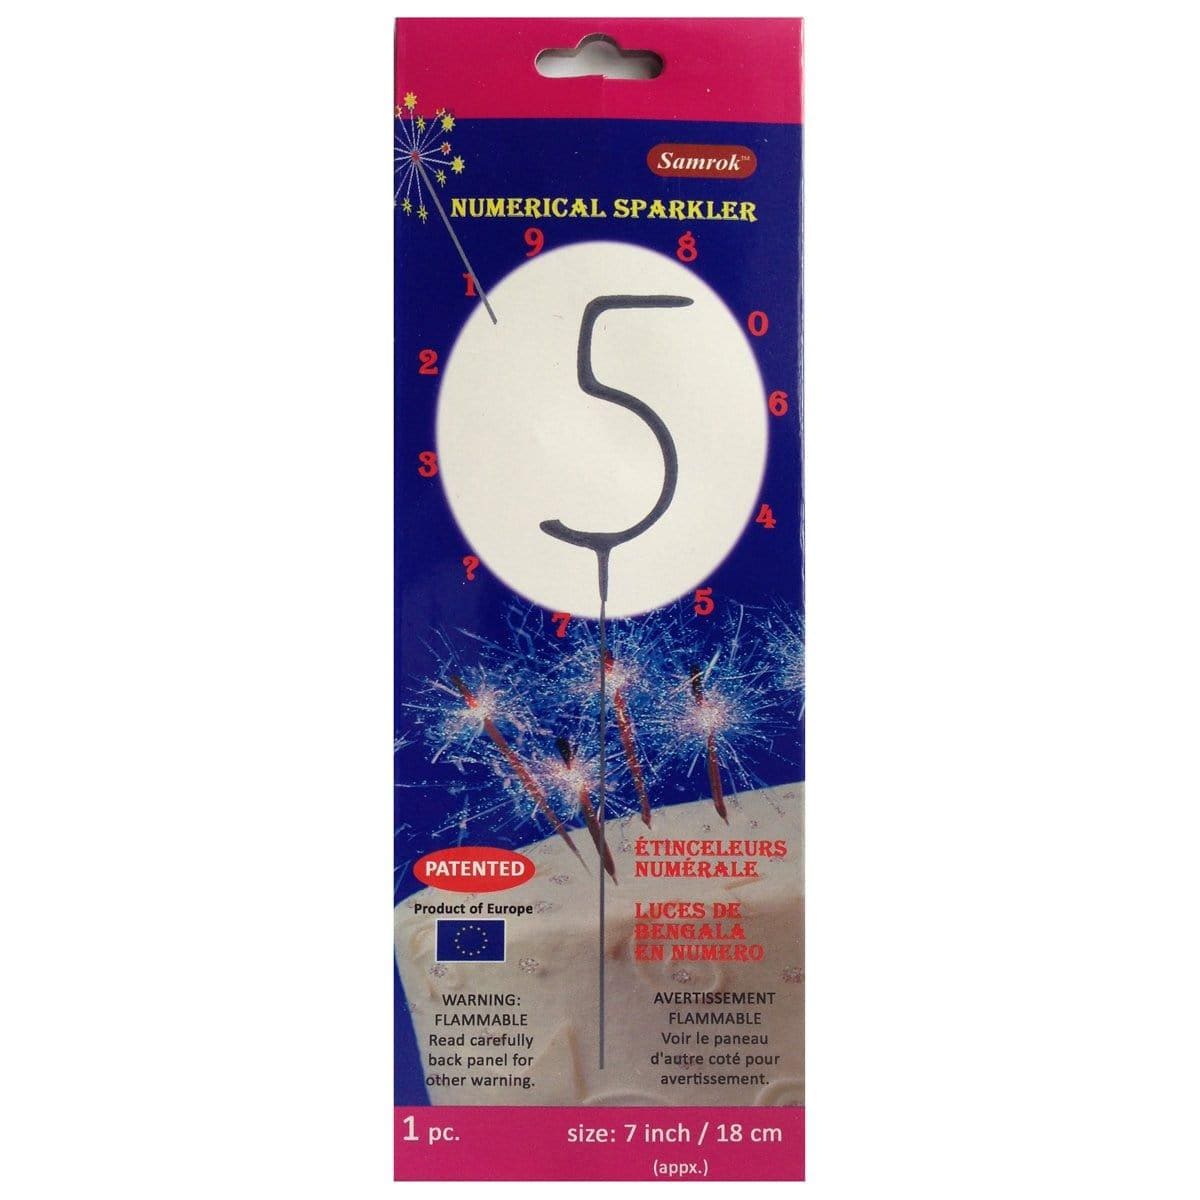 Buy Cake Supplies Numeral Sparkler # 5 sold at Party Expert